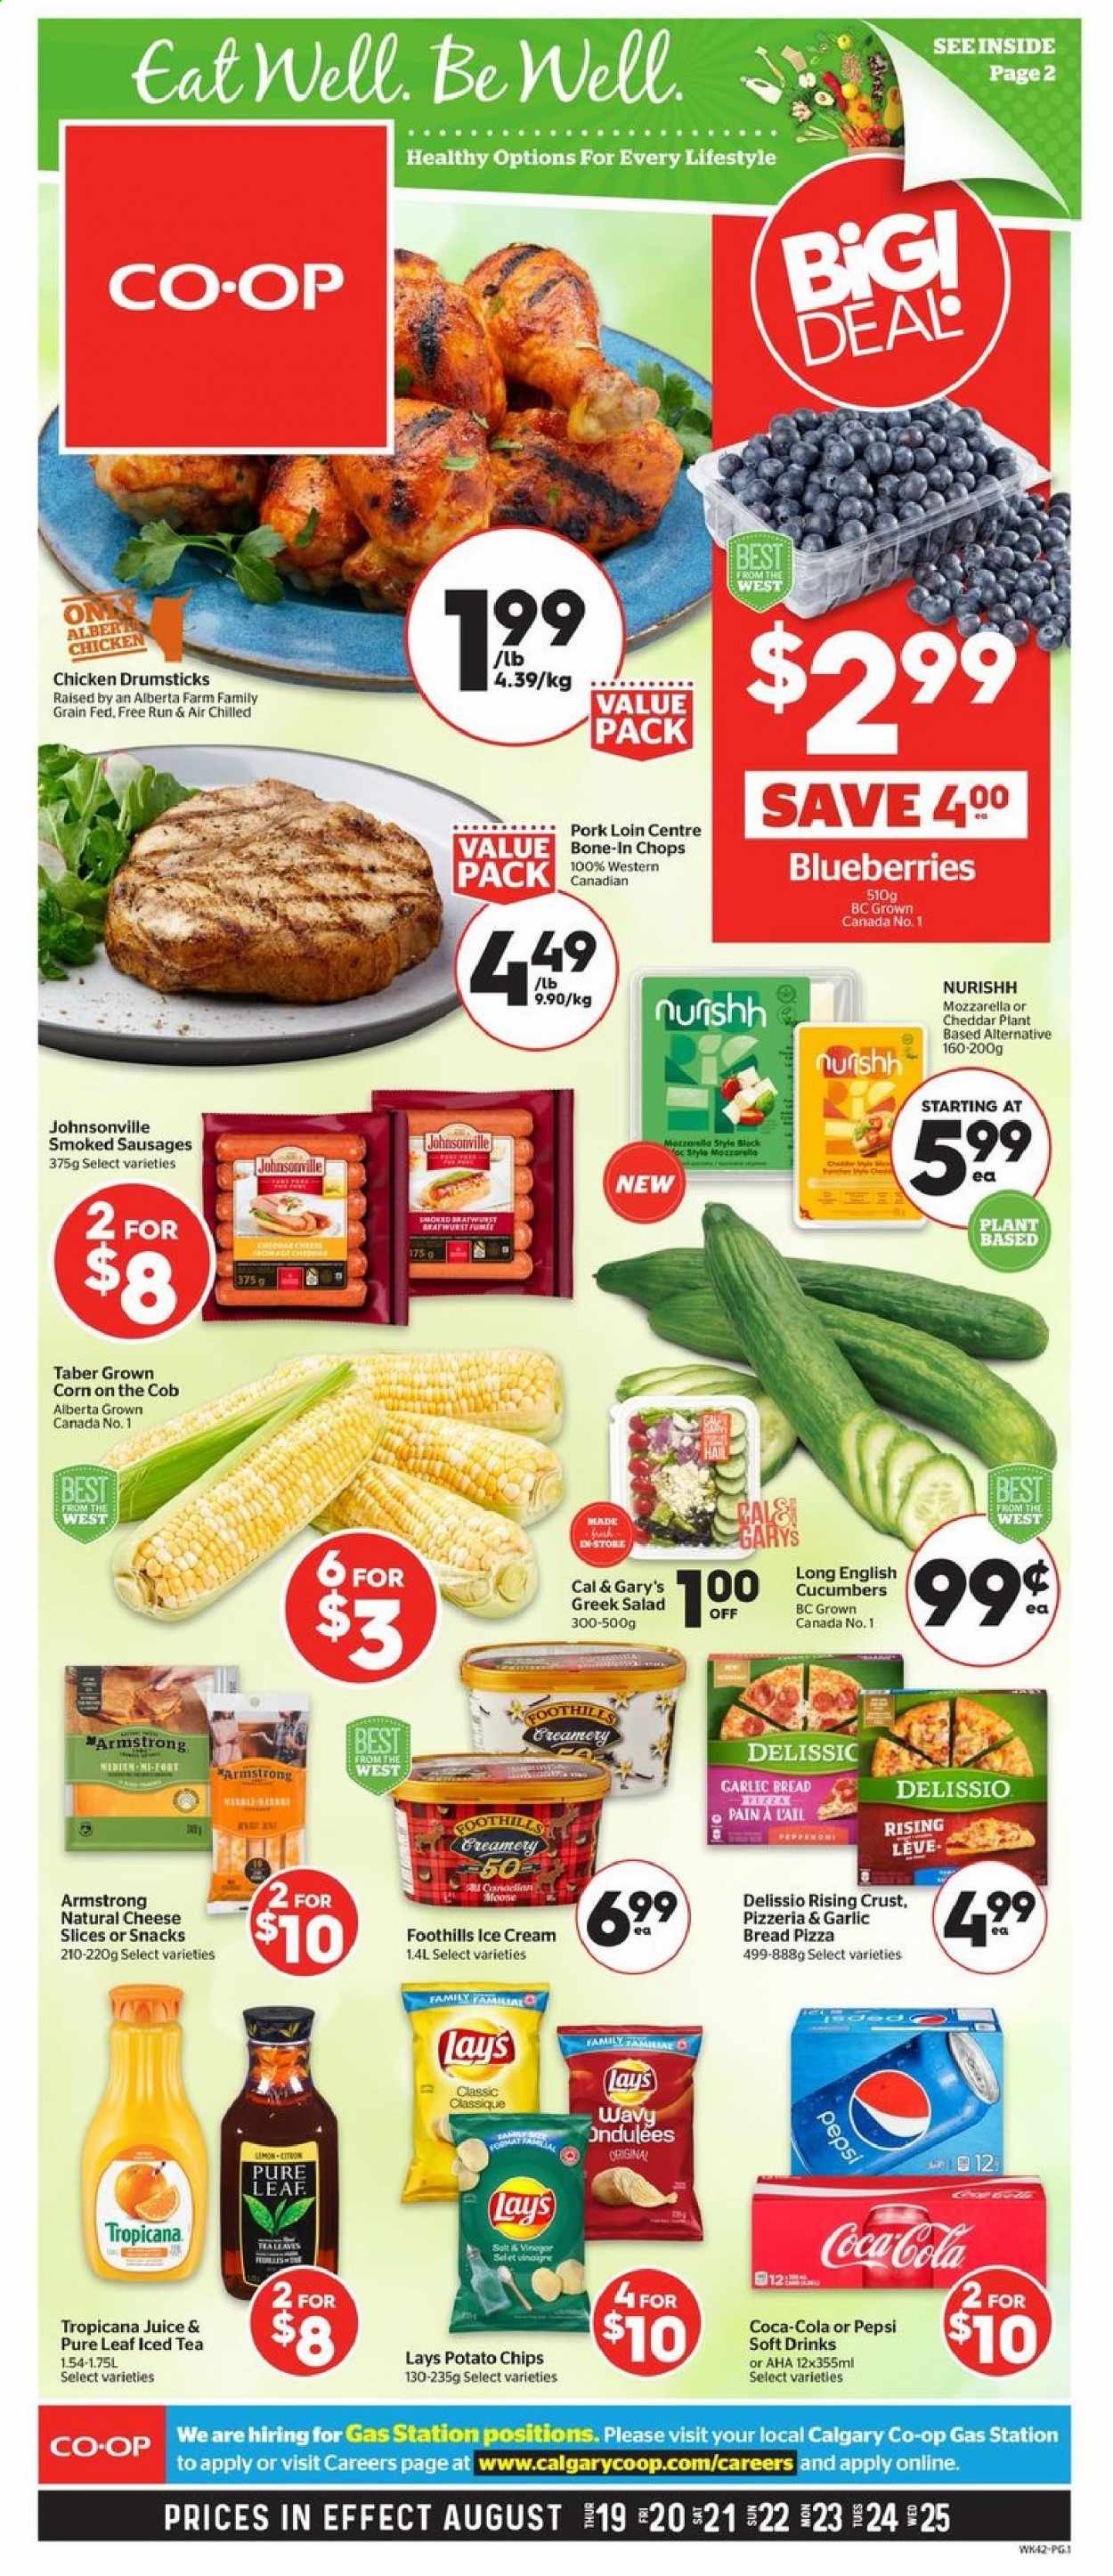 thumbnail - Calgary Co-op Flyer - August 19, 2021 - August 25, 2021 - Sales products - bread, corn, cucumber, salad, blueberries, pizza, Johnsonville, sausage, sliced cheese, ice cream, potato chips, Lay’s, Coca-Cola, Pepsi, juice, ice tea, soft drink, Pure Leaf, chicken drumsticks, chicken, pork loin, pork meat, chips. Page 1.